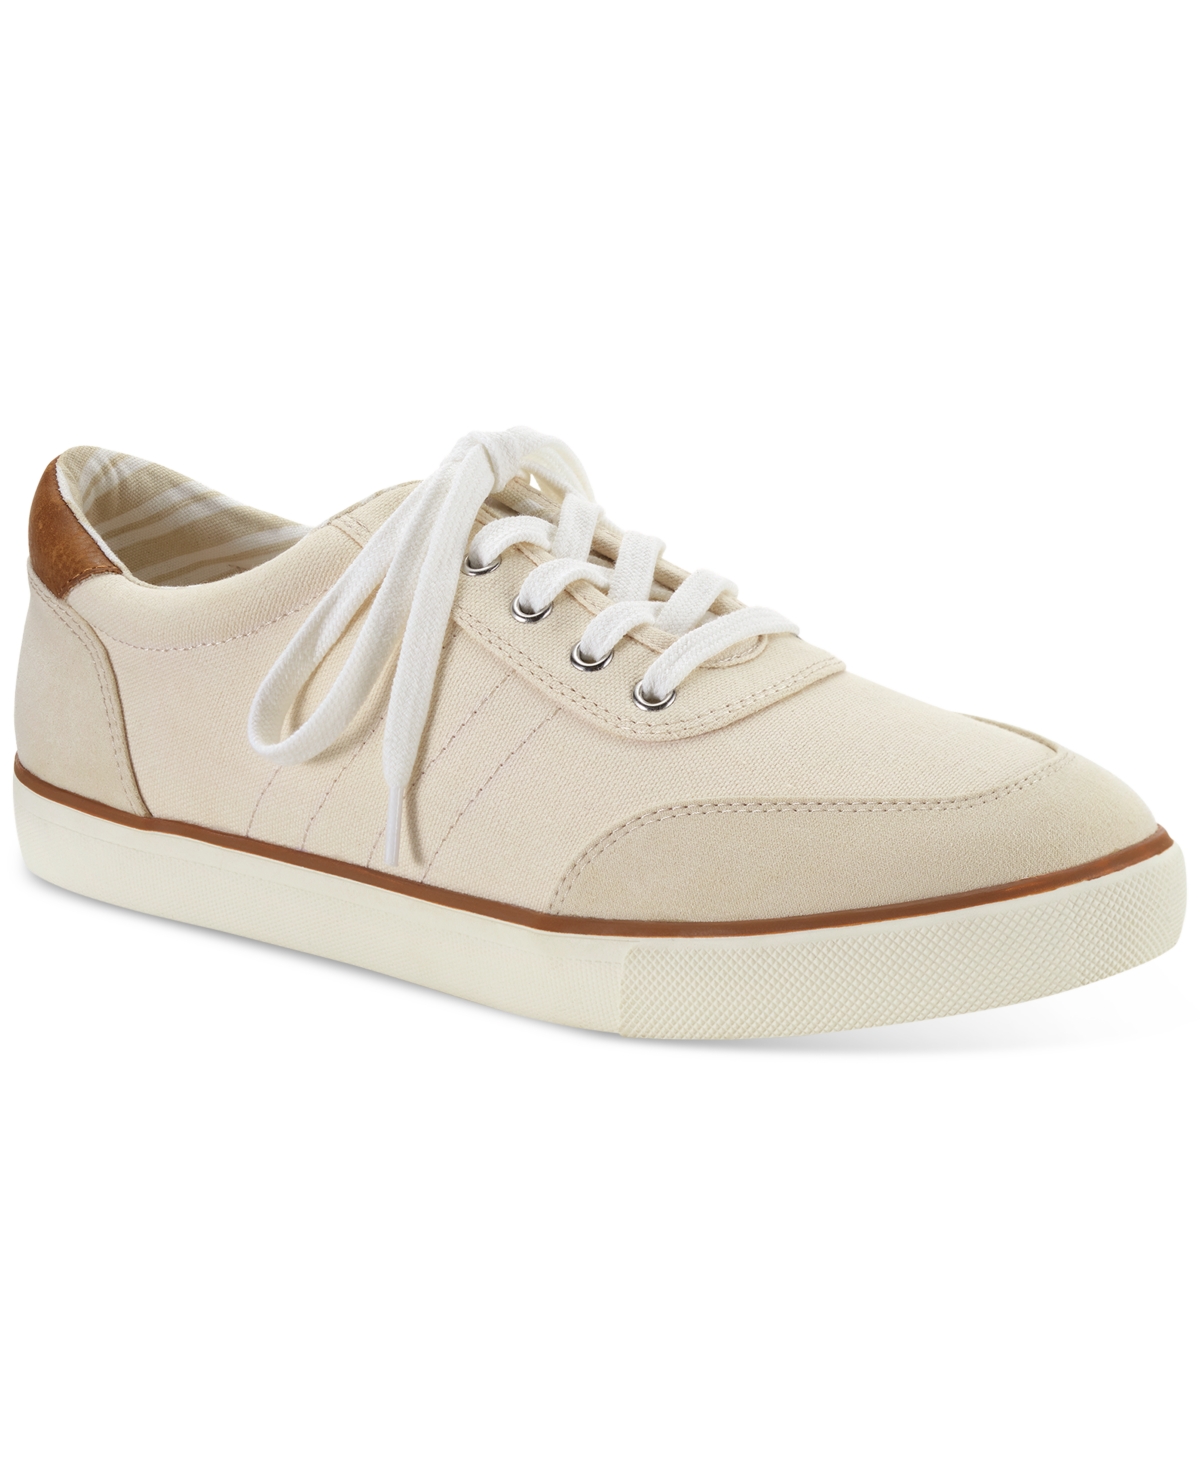 Club Room Men's Stripe Lace-Up Sneakers, Created for Macy's Men's Shoes ...